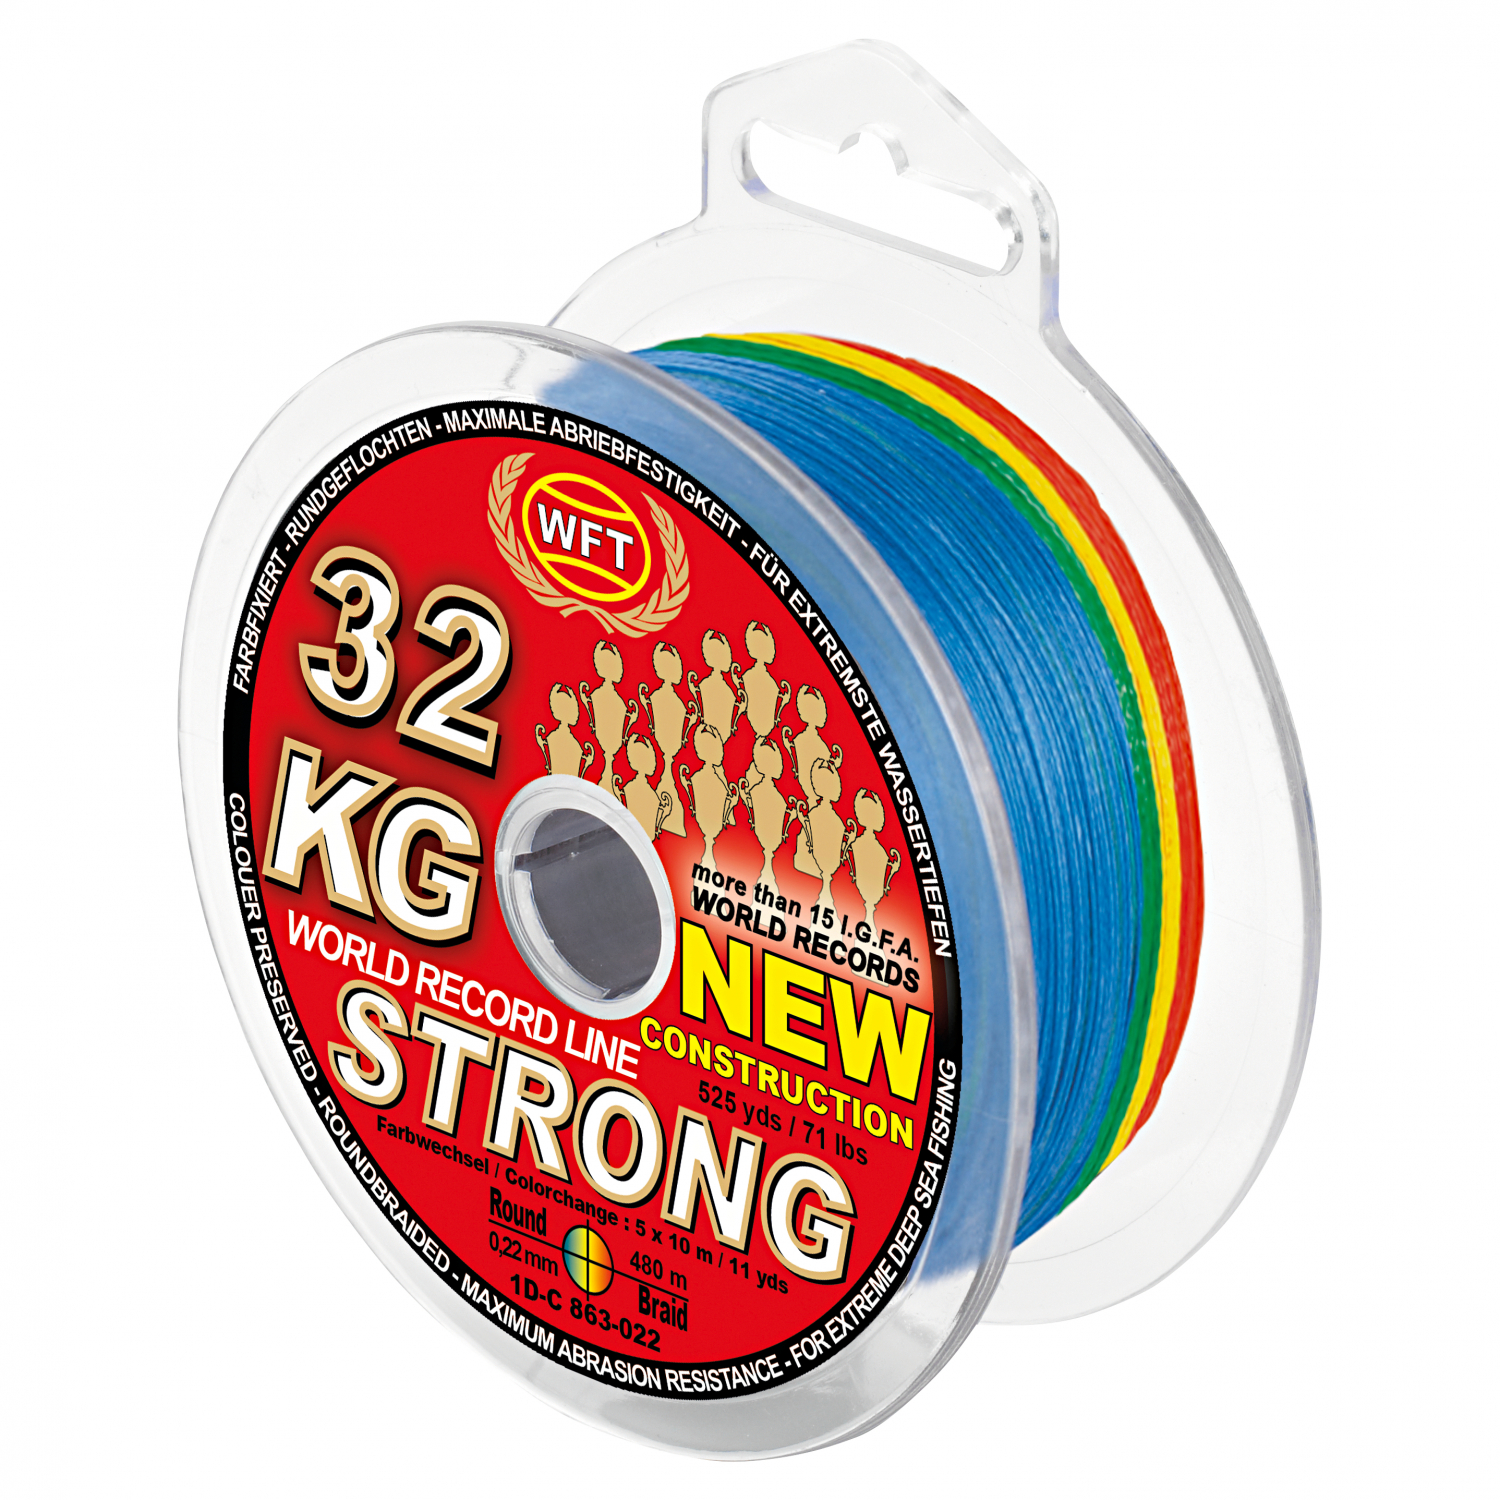 WFT Fishing line KG Strong Exact 